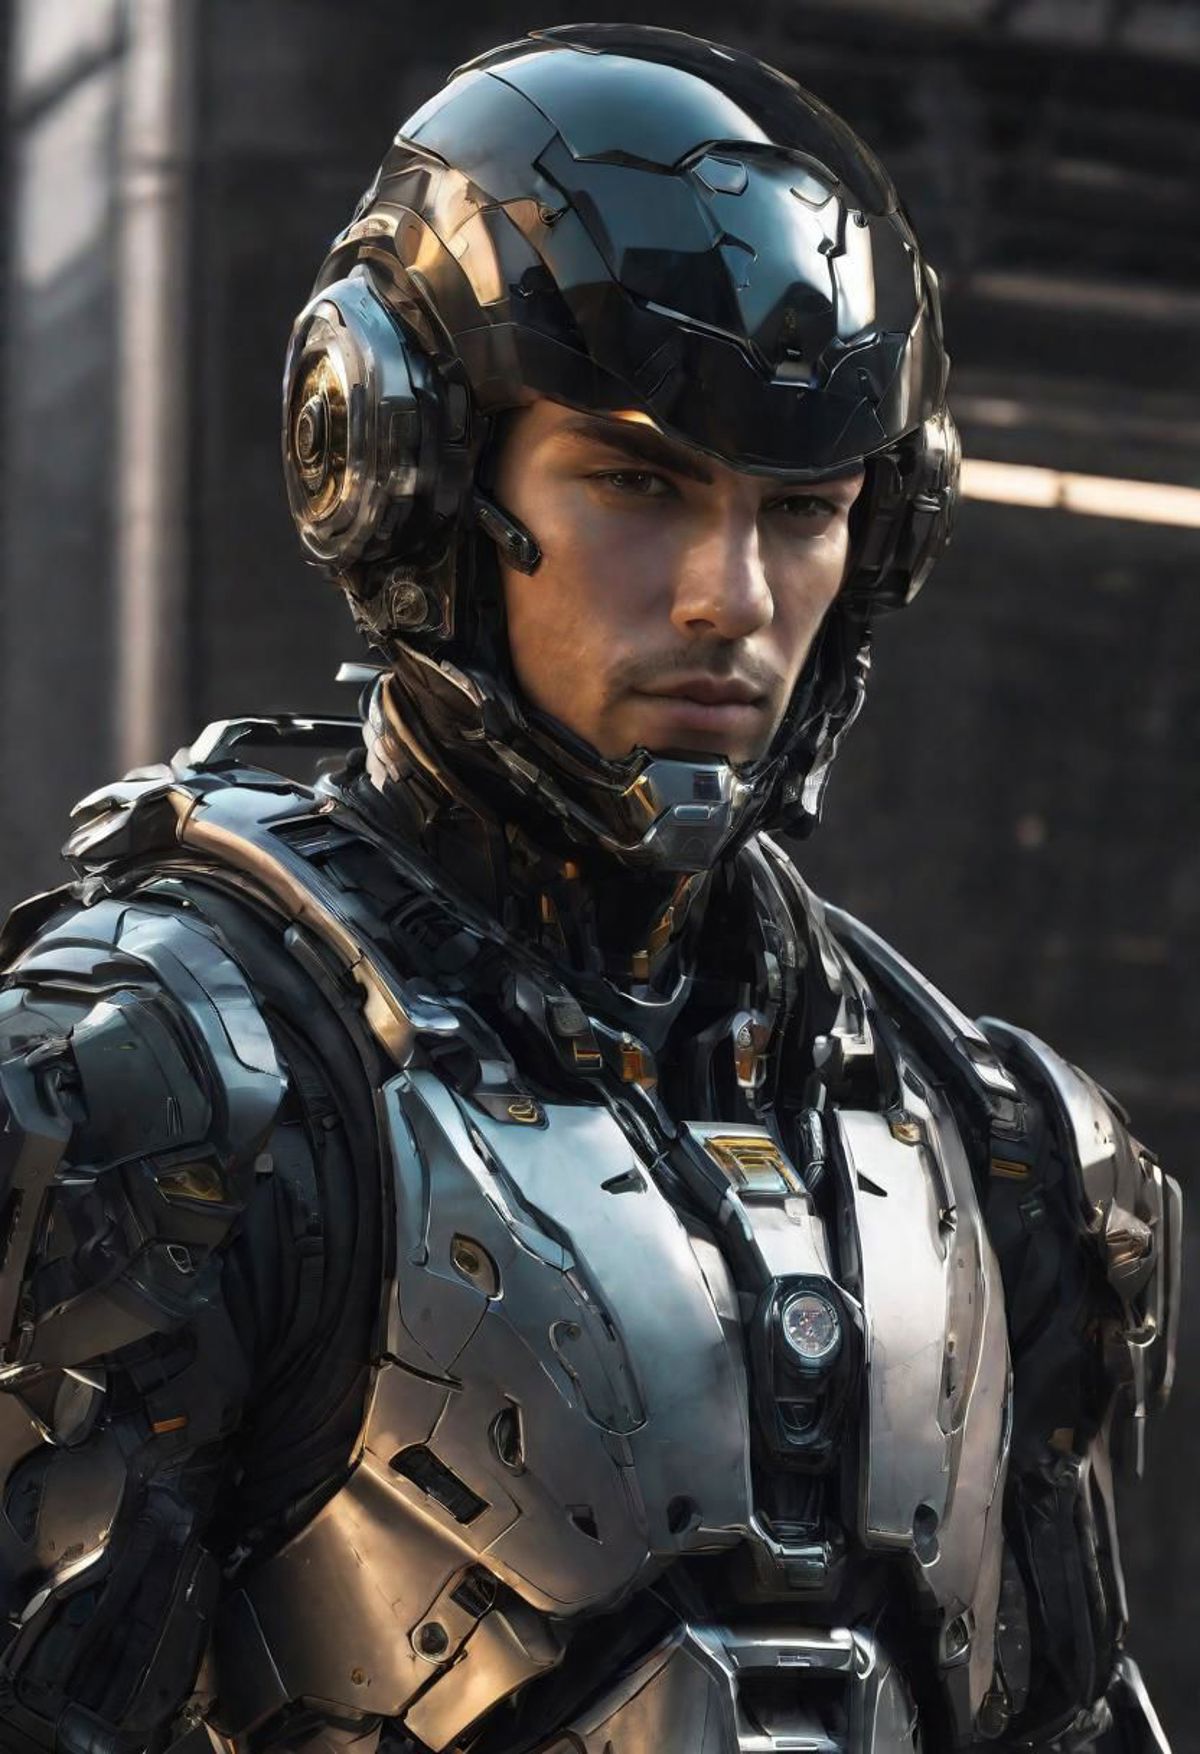 A man wearing a silver and black armor suit.